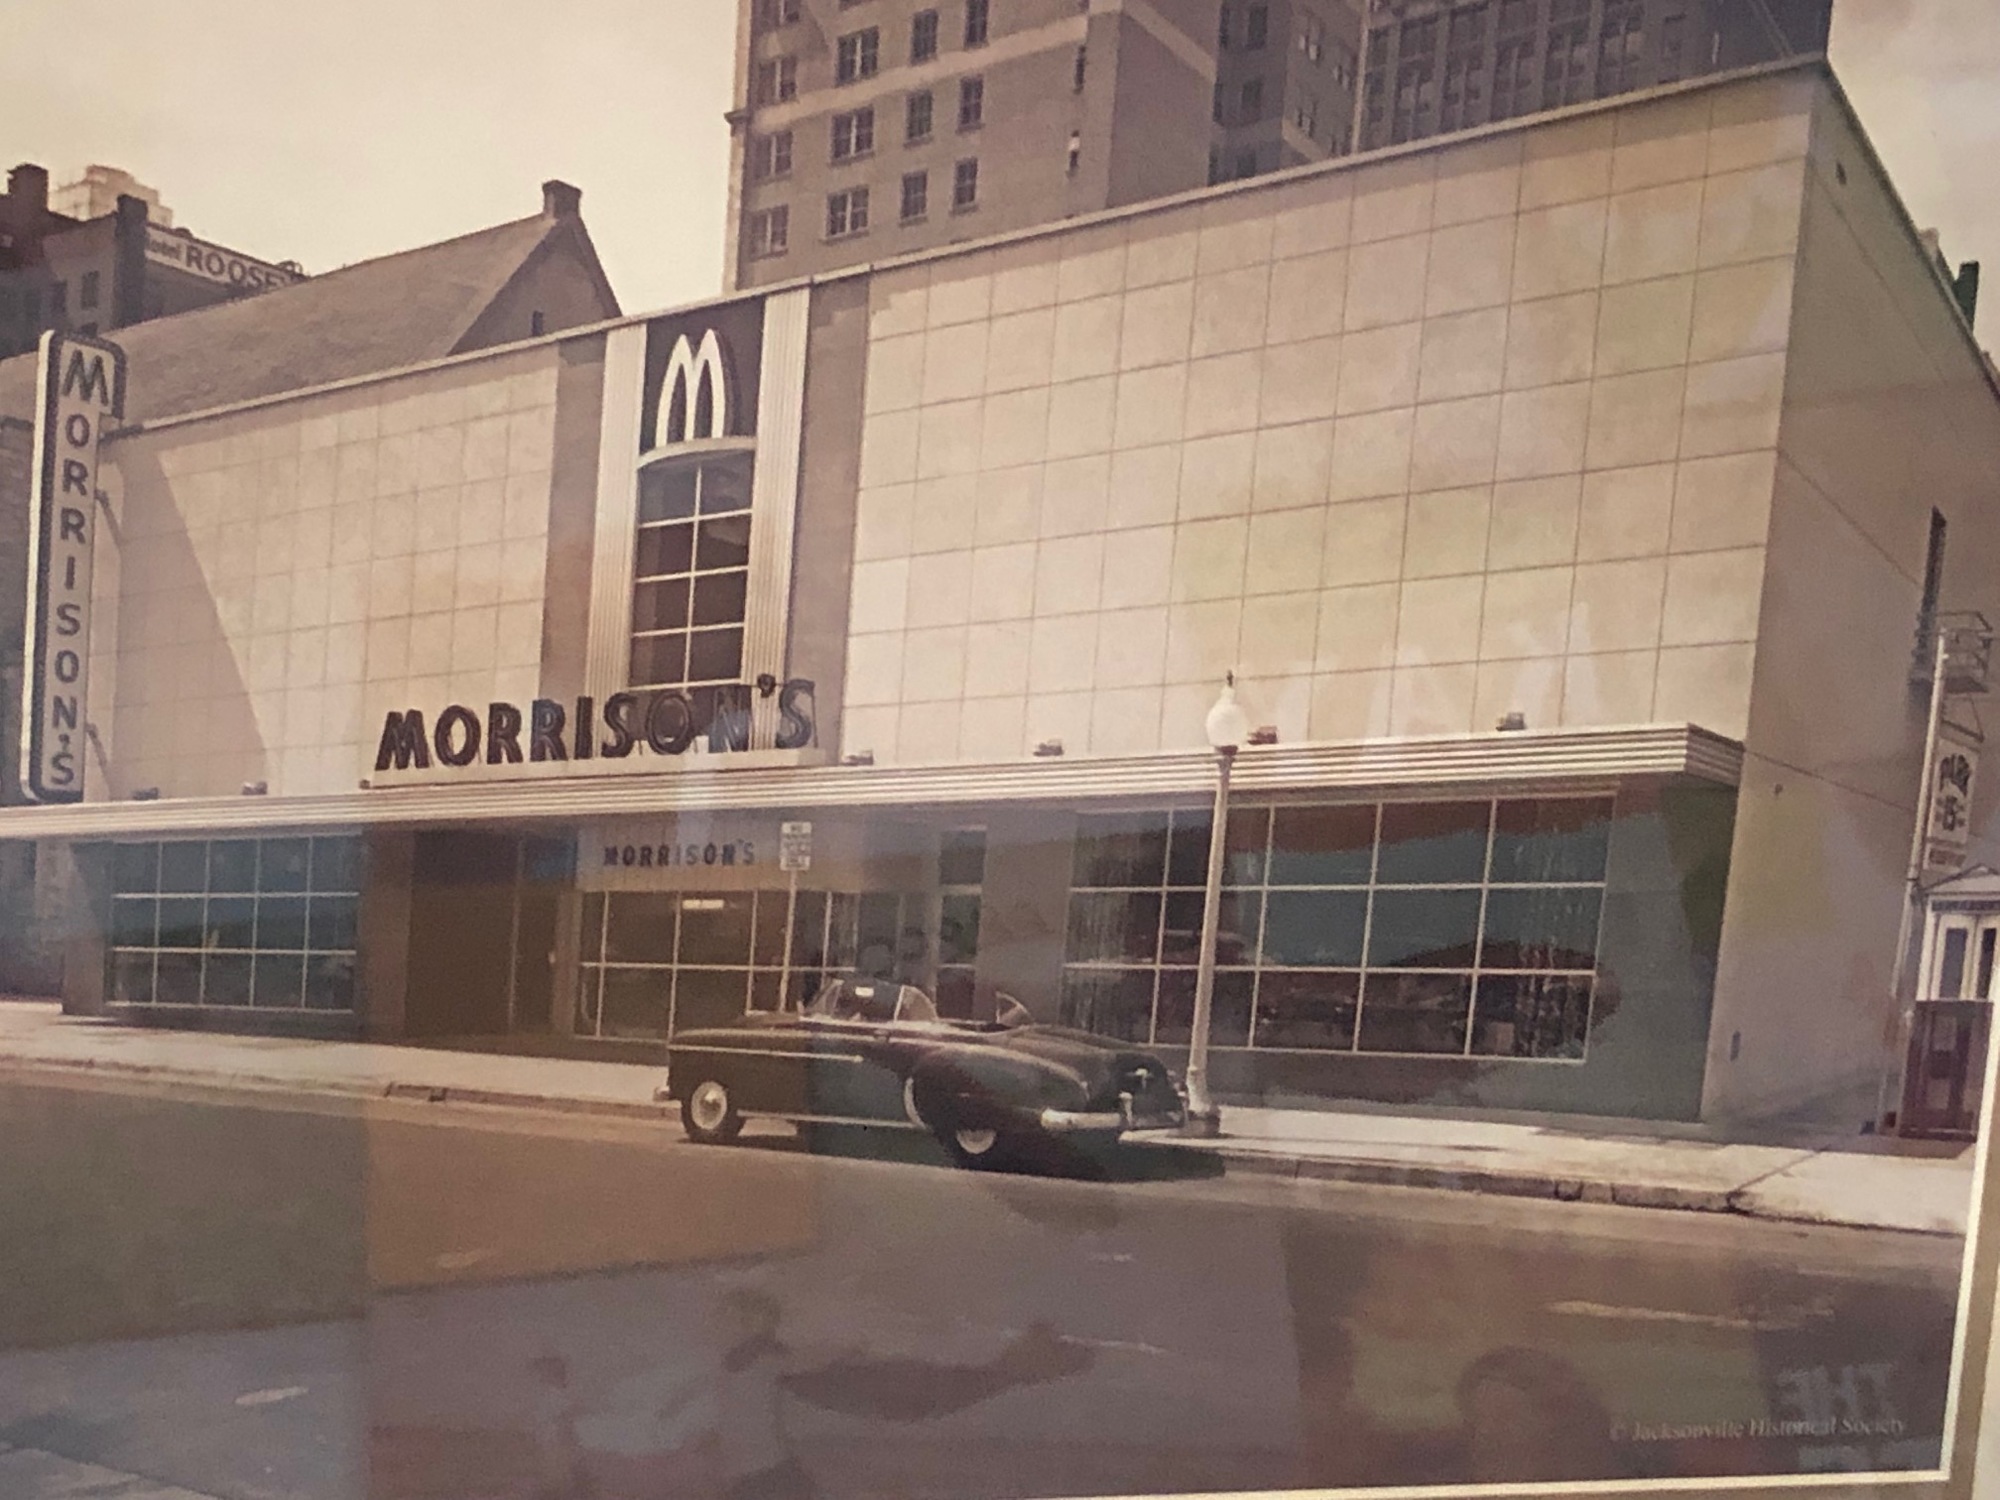 The space was once Morrison's Cafeteria.